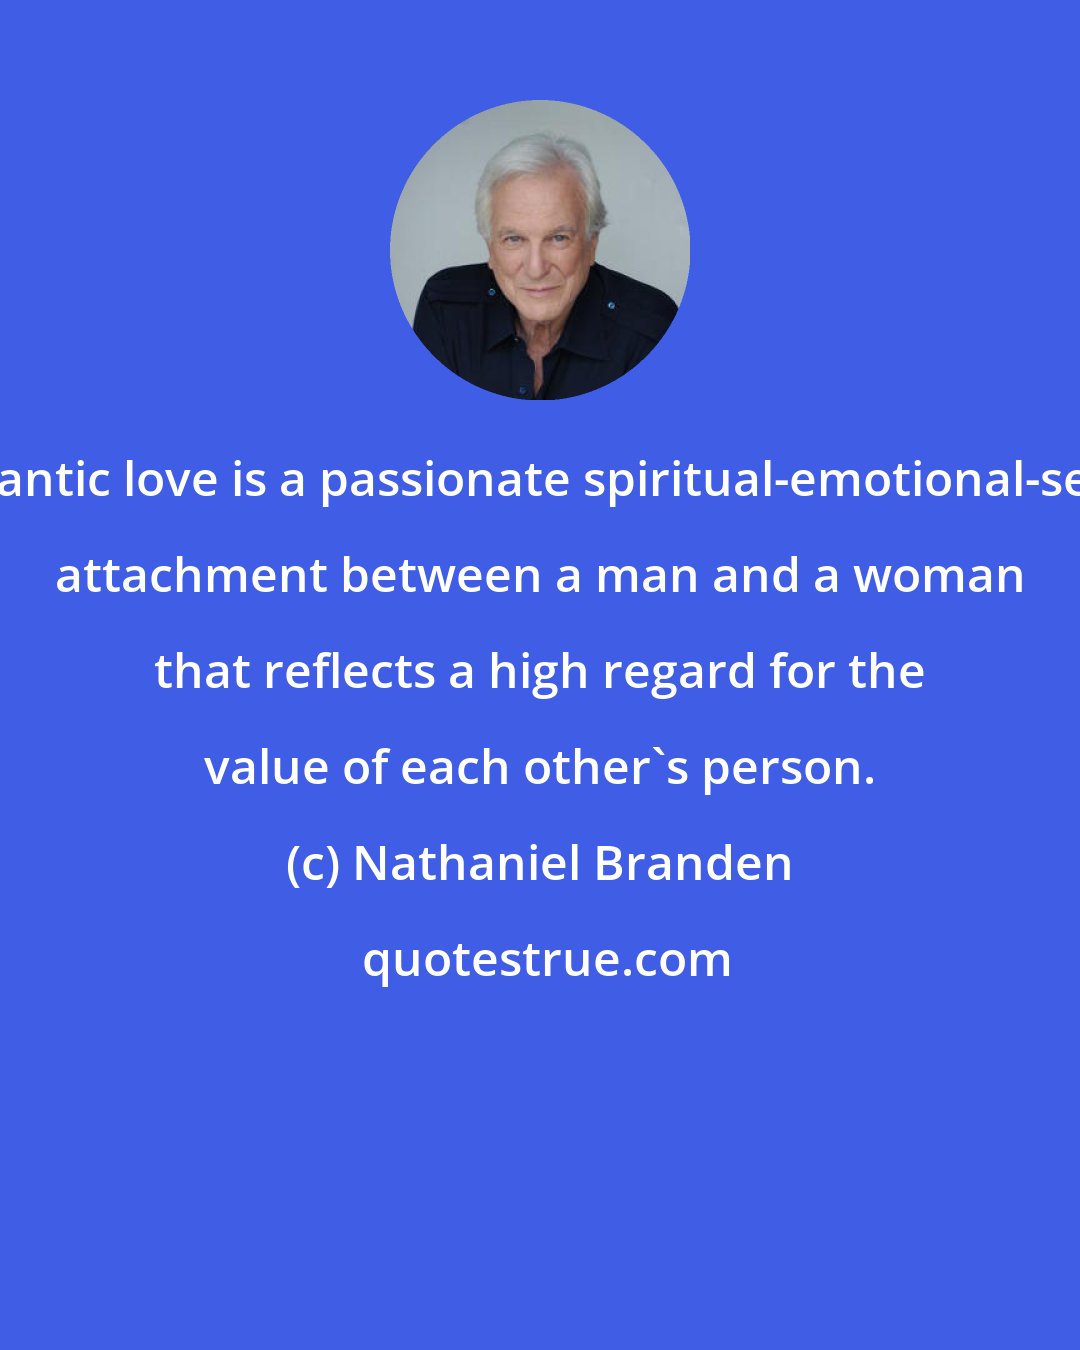 Nathaniel Branden: Romantic love is a passionate spiritual-emotional-sexual attachment between a man and a woman that reflects a high regard for the value of each other's person.